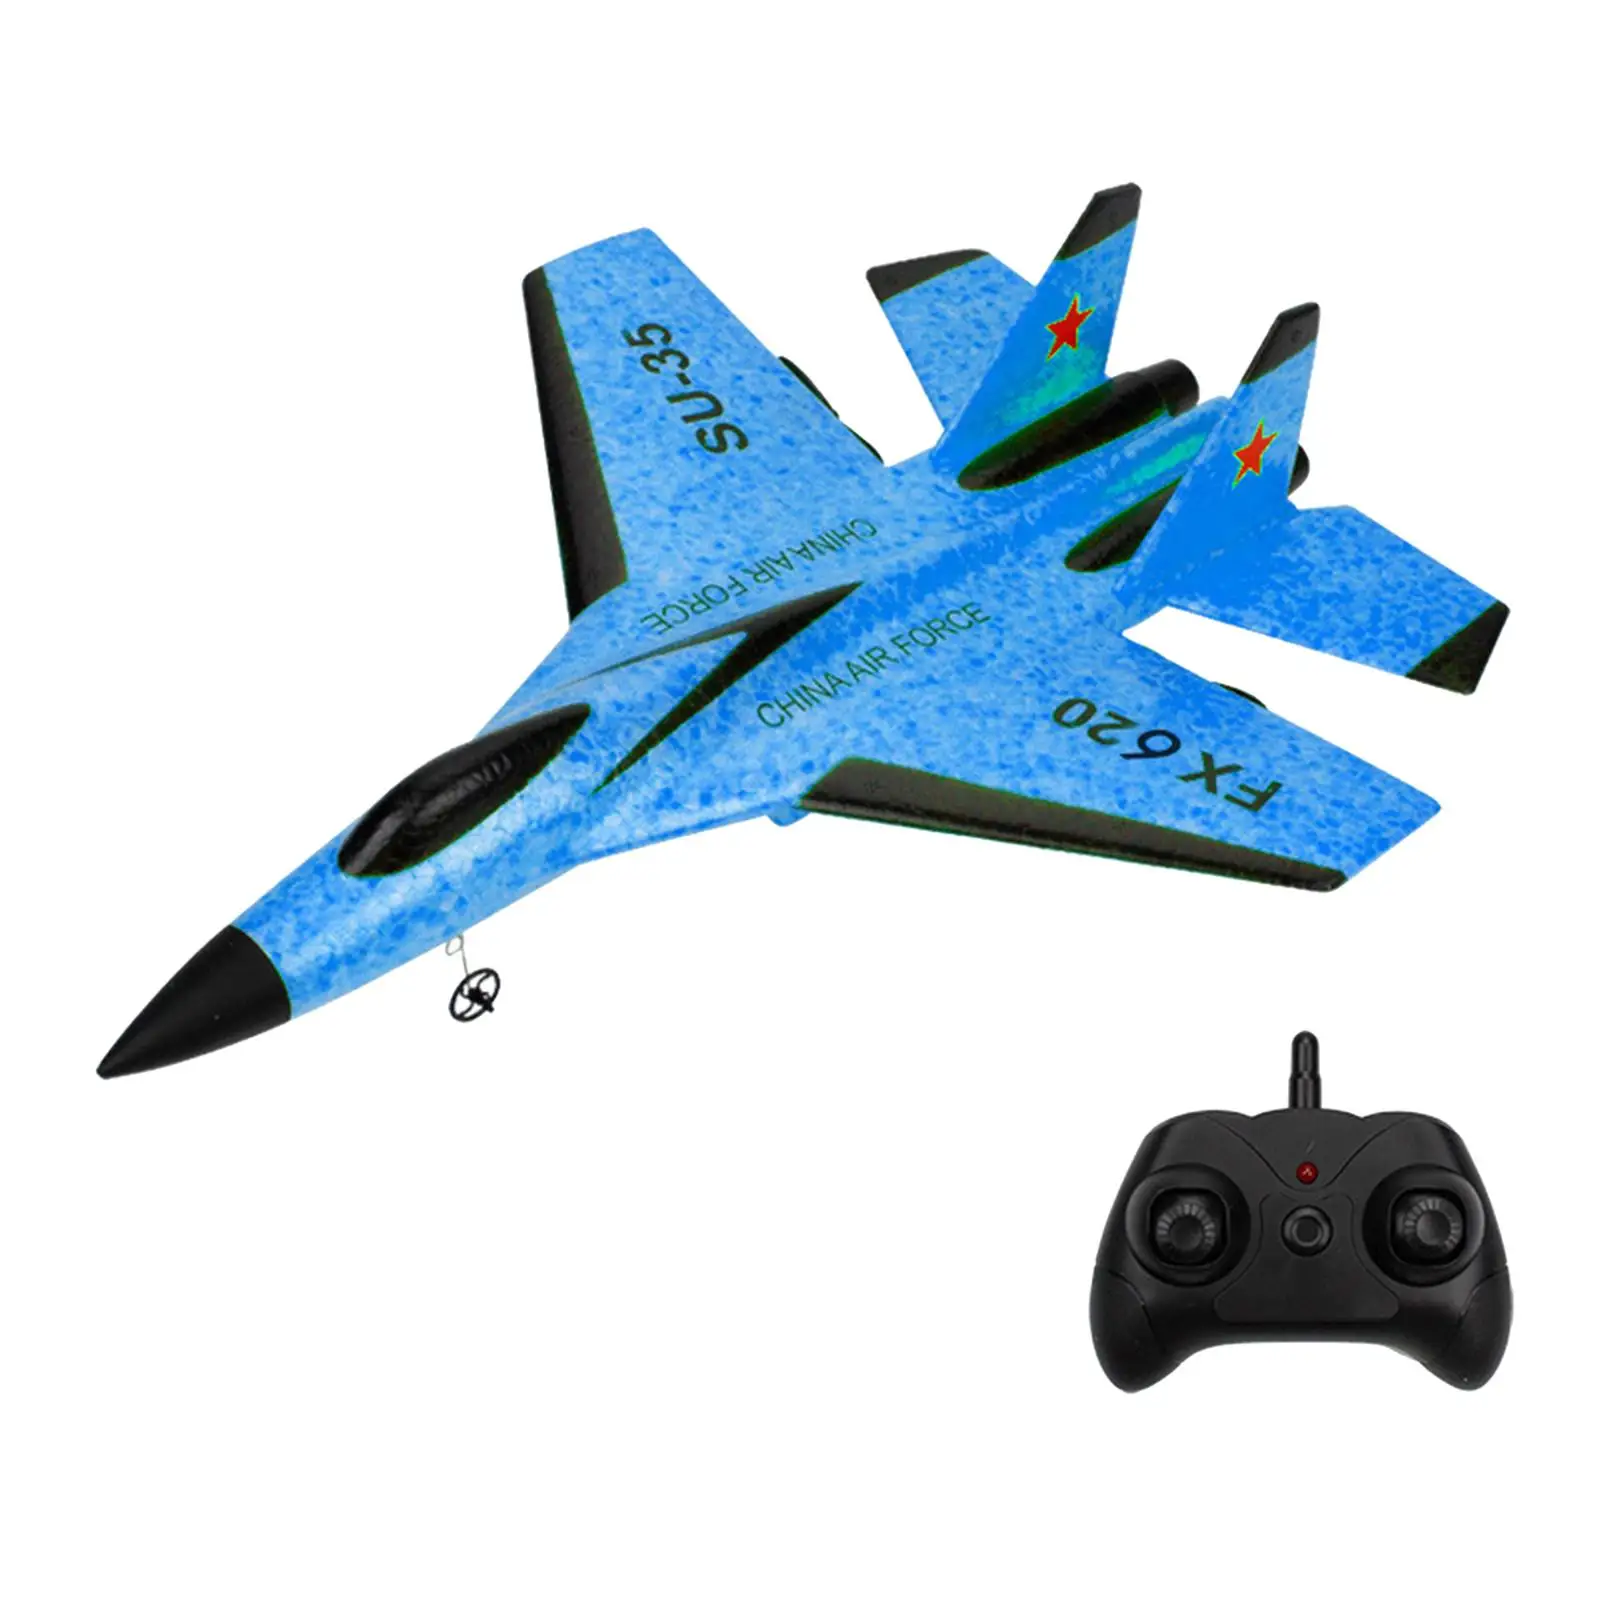 2.4G 2CH Remote Control Aircraft Foam Outdoor Game Birthday Gifts for Kids